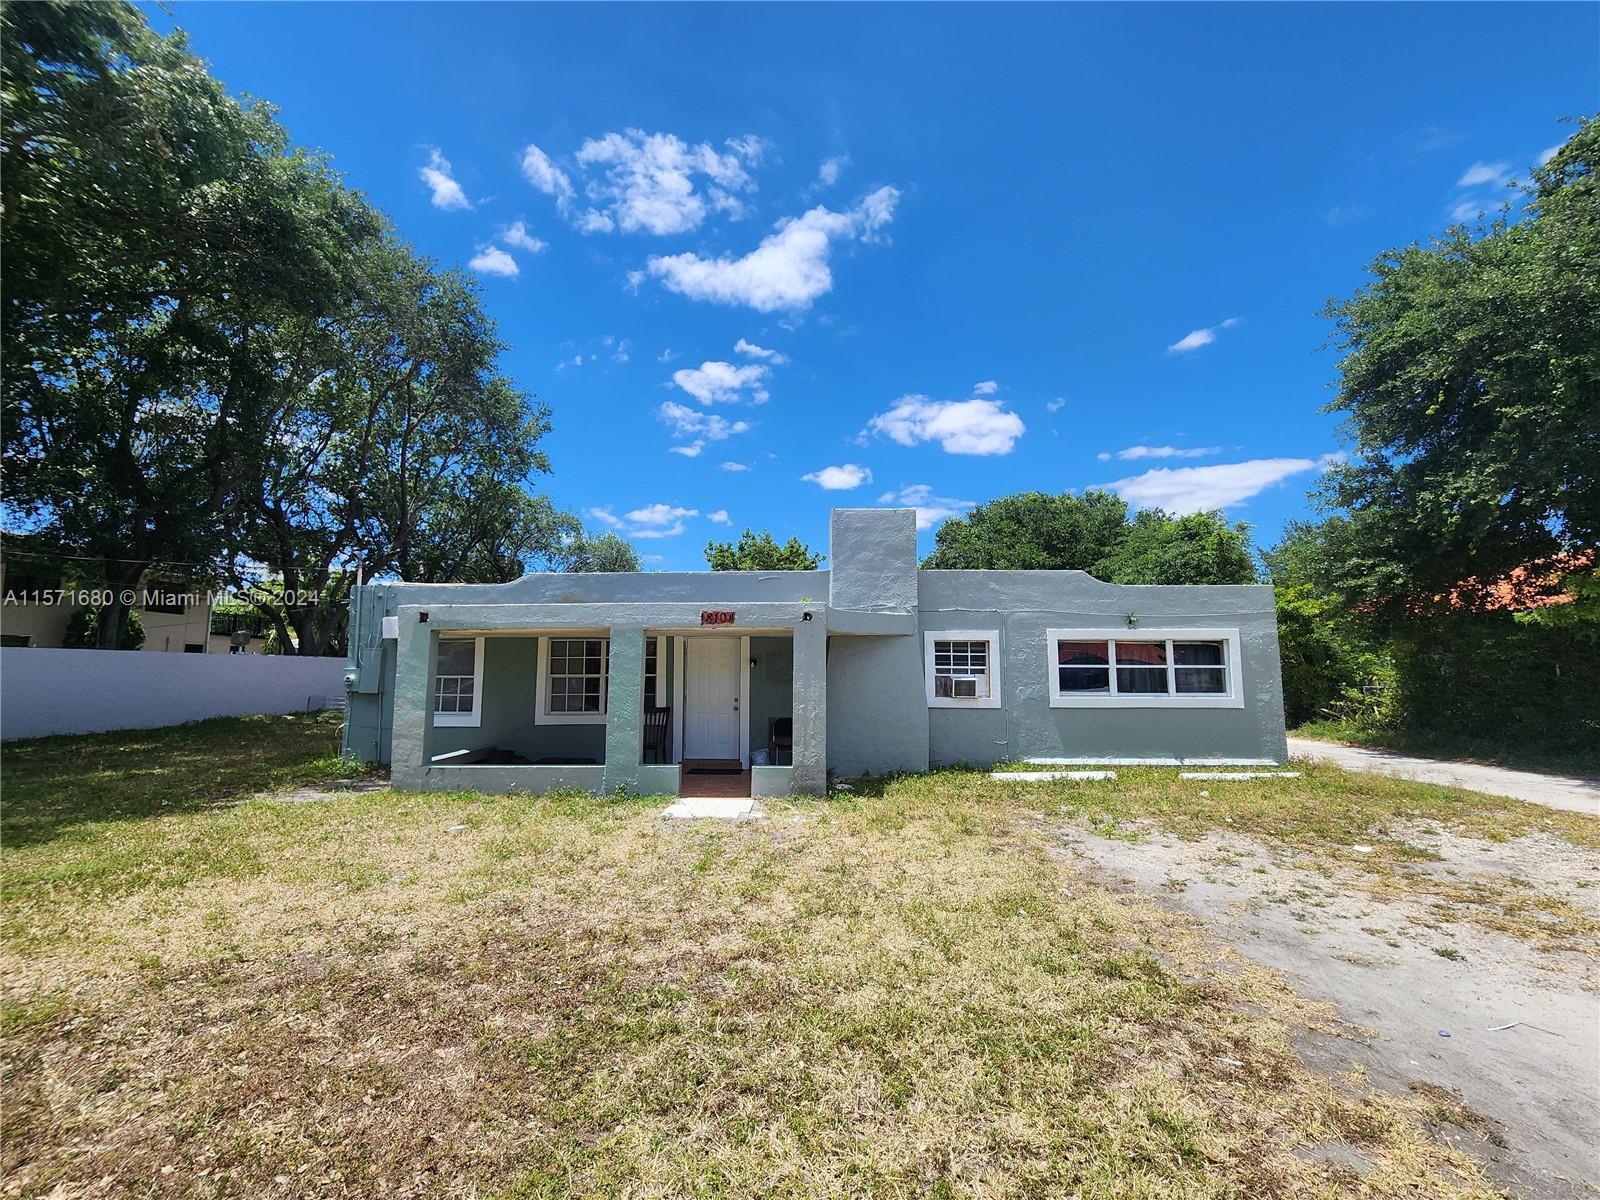 Photo of 18104 NW 19th Ave in Miami Gardens, FL